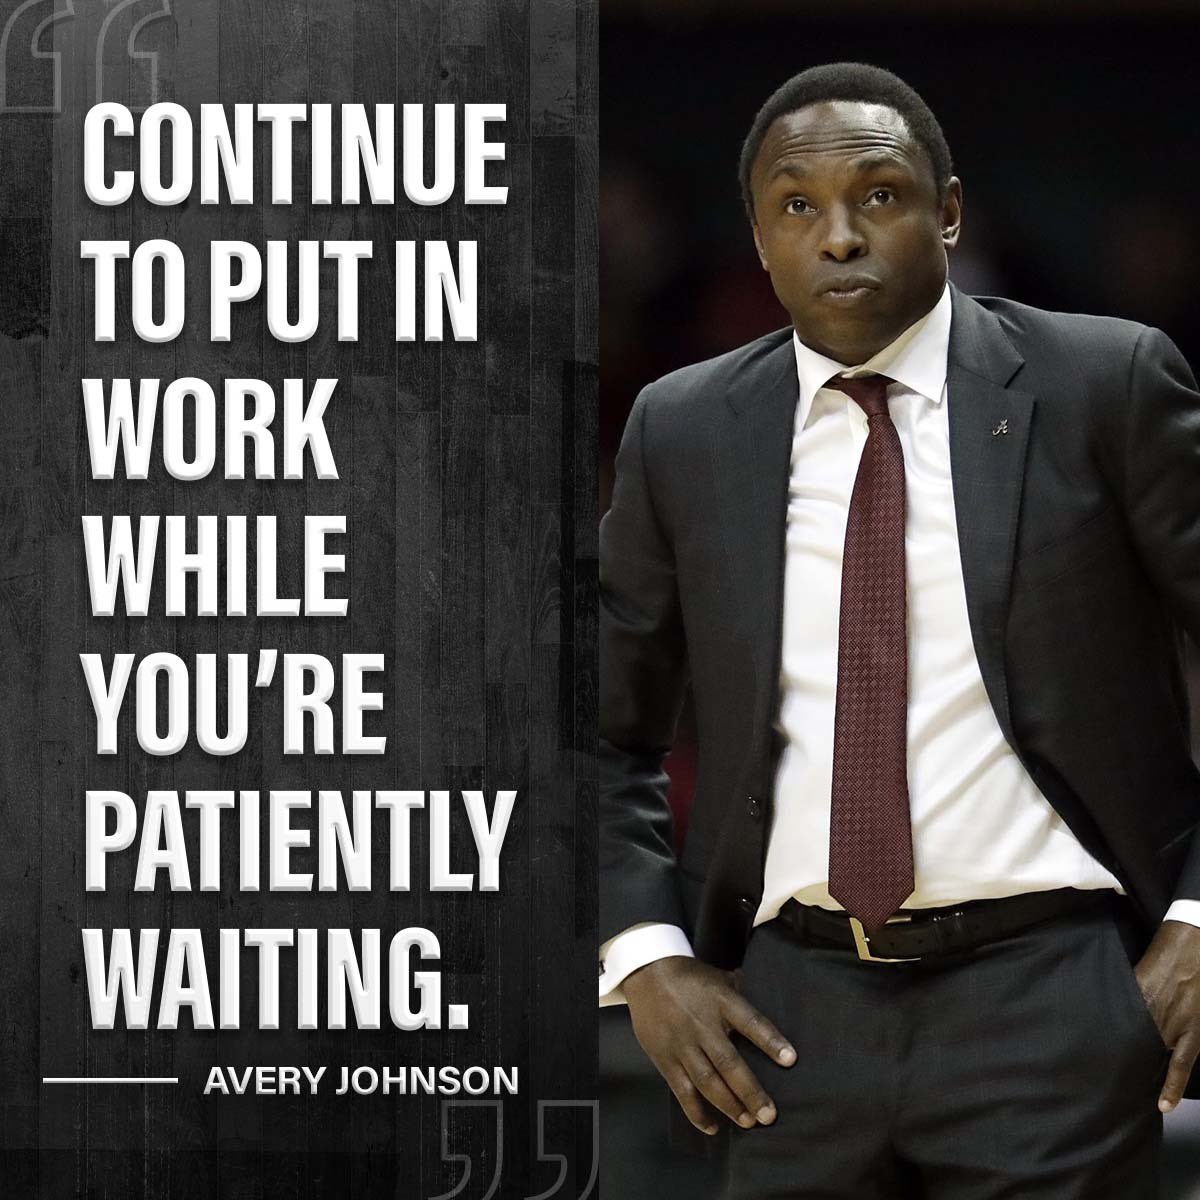 While waiting for something to happen or for a certain opportunity to arise, it's important to keep working hard and making progress towards your goals. During times of uncertainty or waiting, be proactive instead of passively waiting for things to fall into place. #CoachAvery